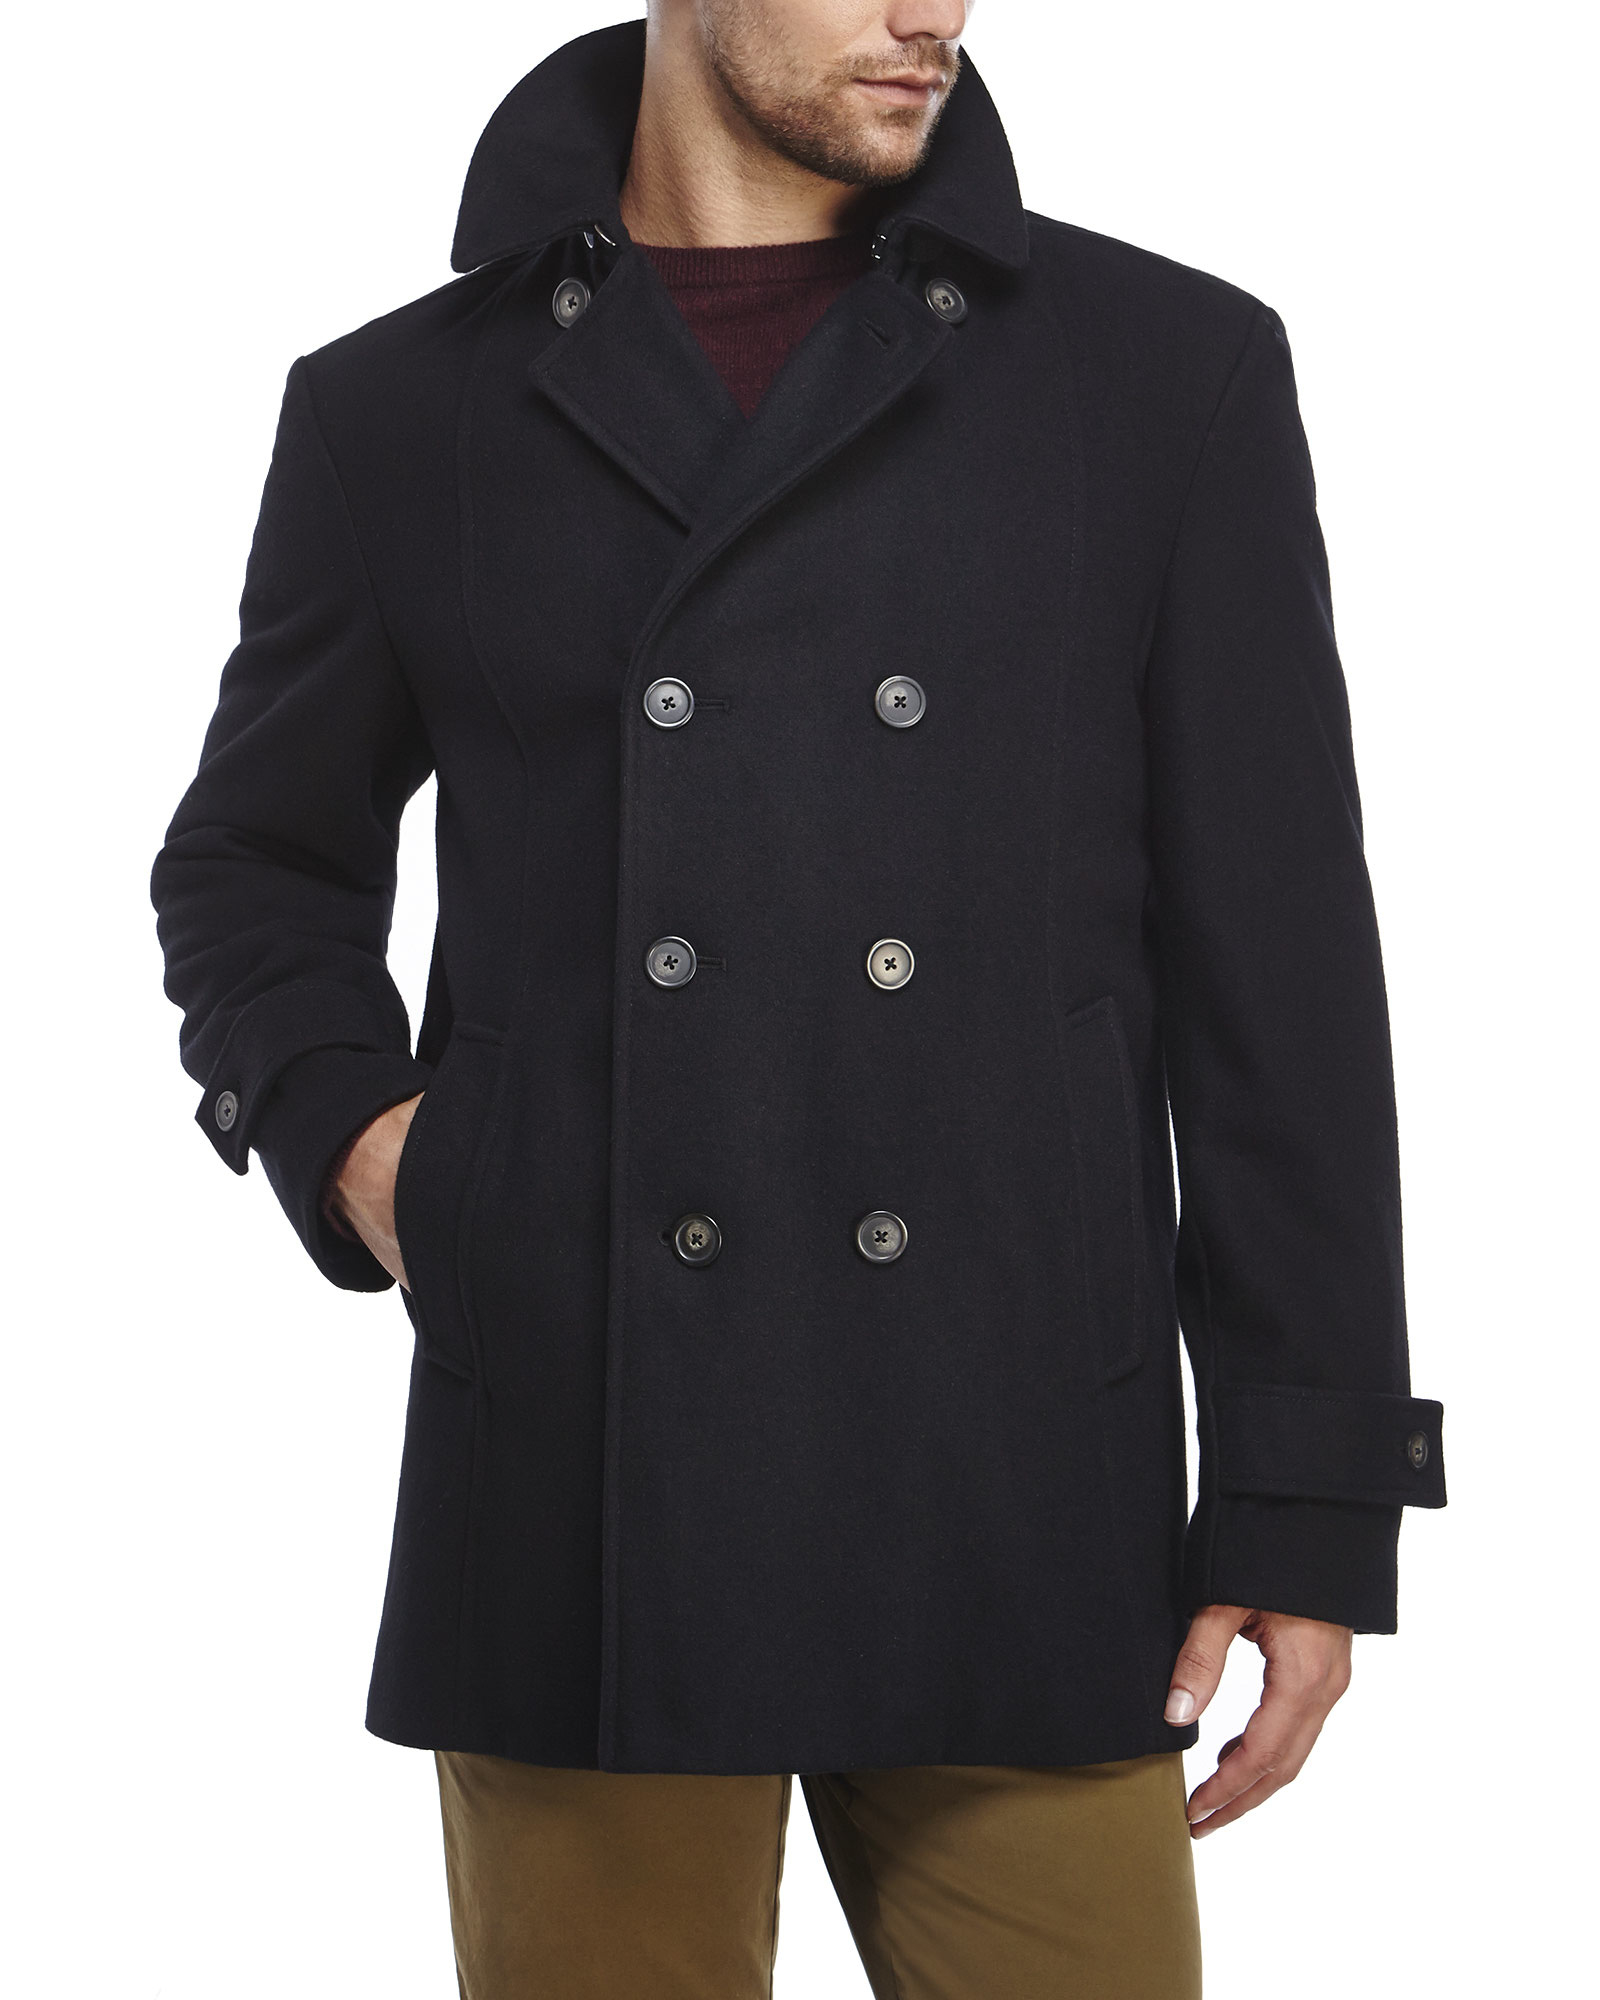 Tommy Hilfiger Short Double Breasted Peacoat Spain, SAVE 56% -  flagfanatics.pl